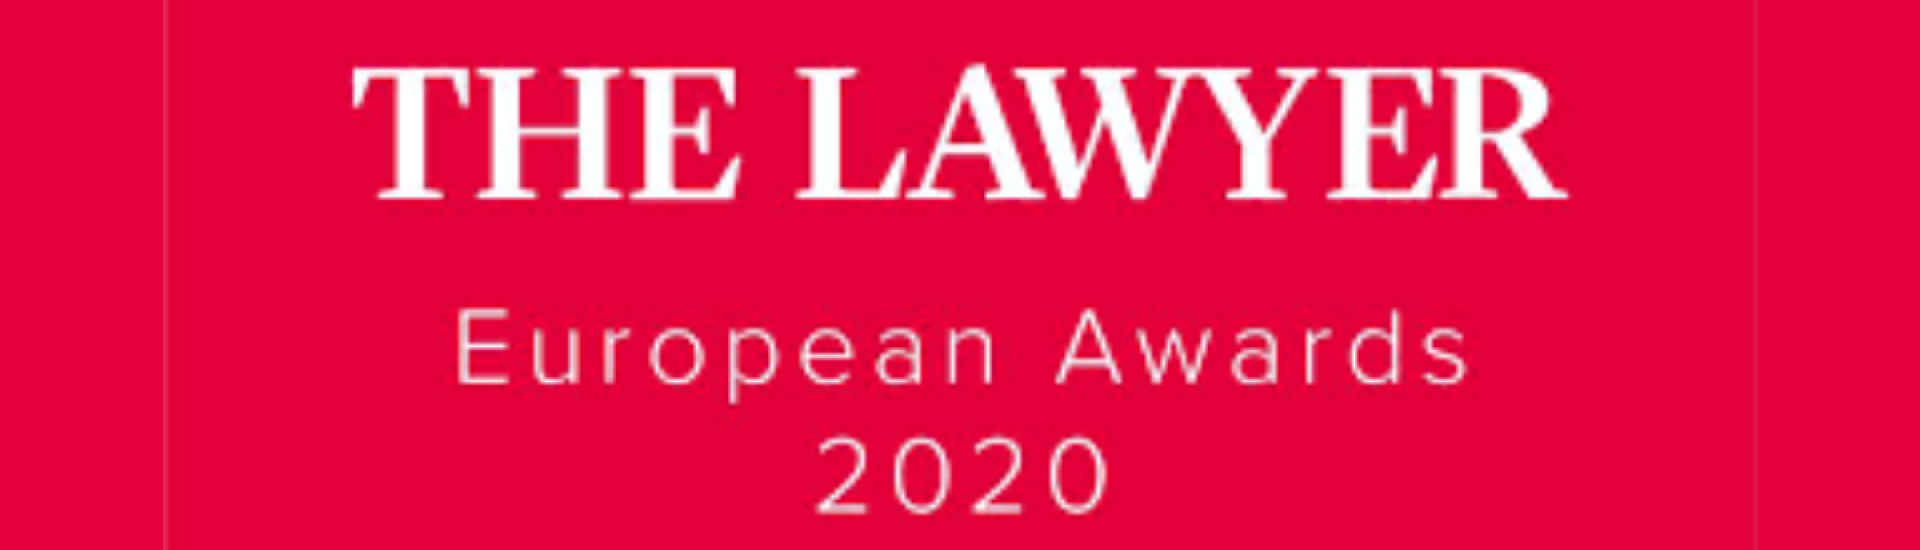 GRATA International has been shortlisted for Law firm of the year